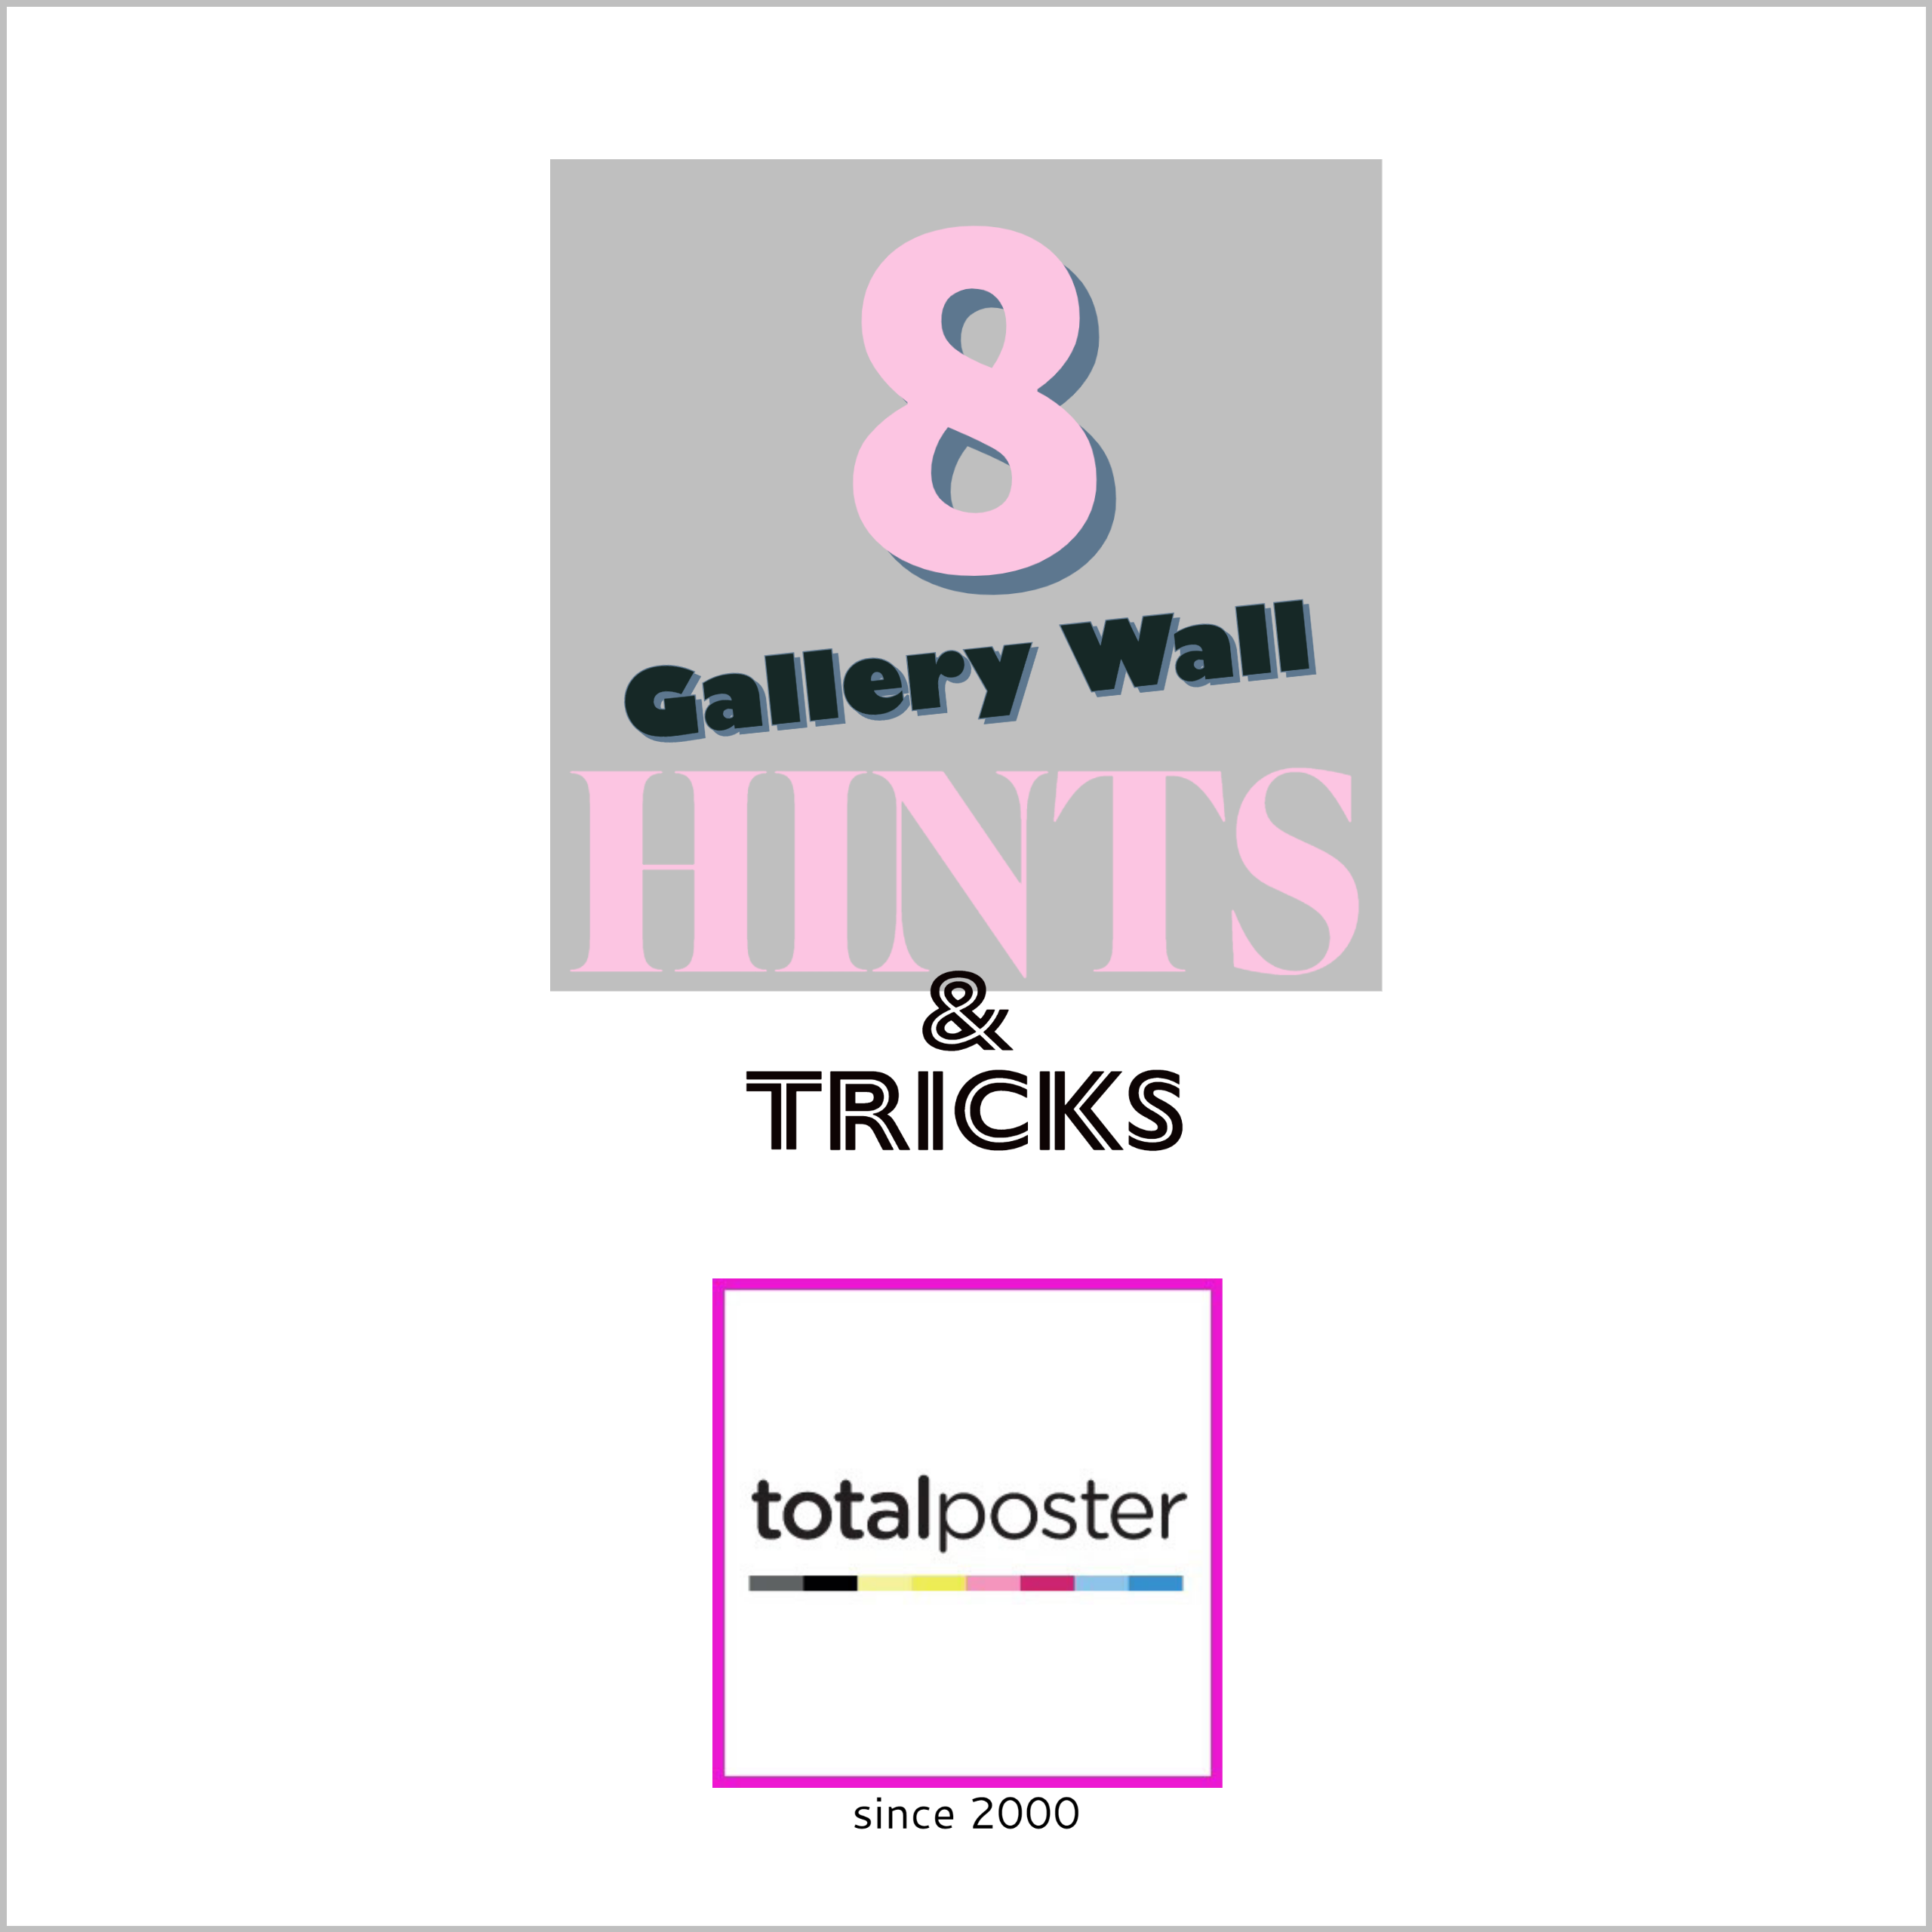 8 Gallery wall hints and tips to turbocharge your favourite space.